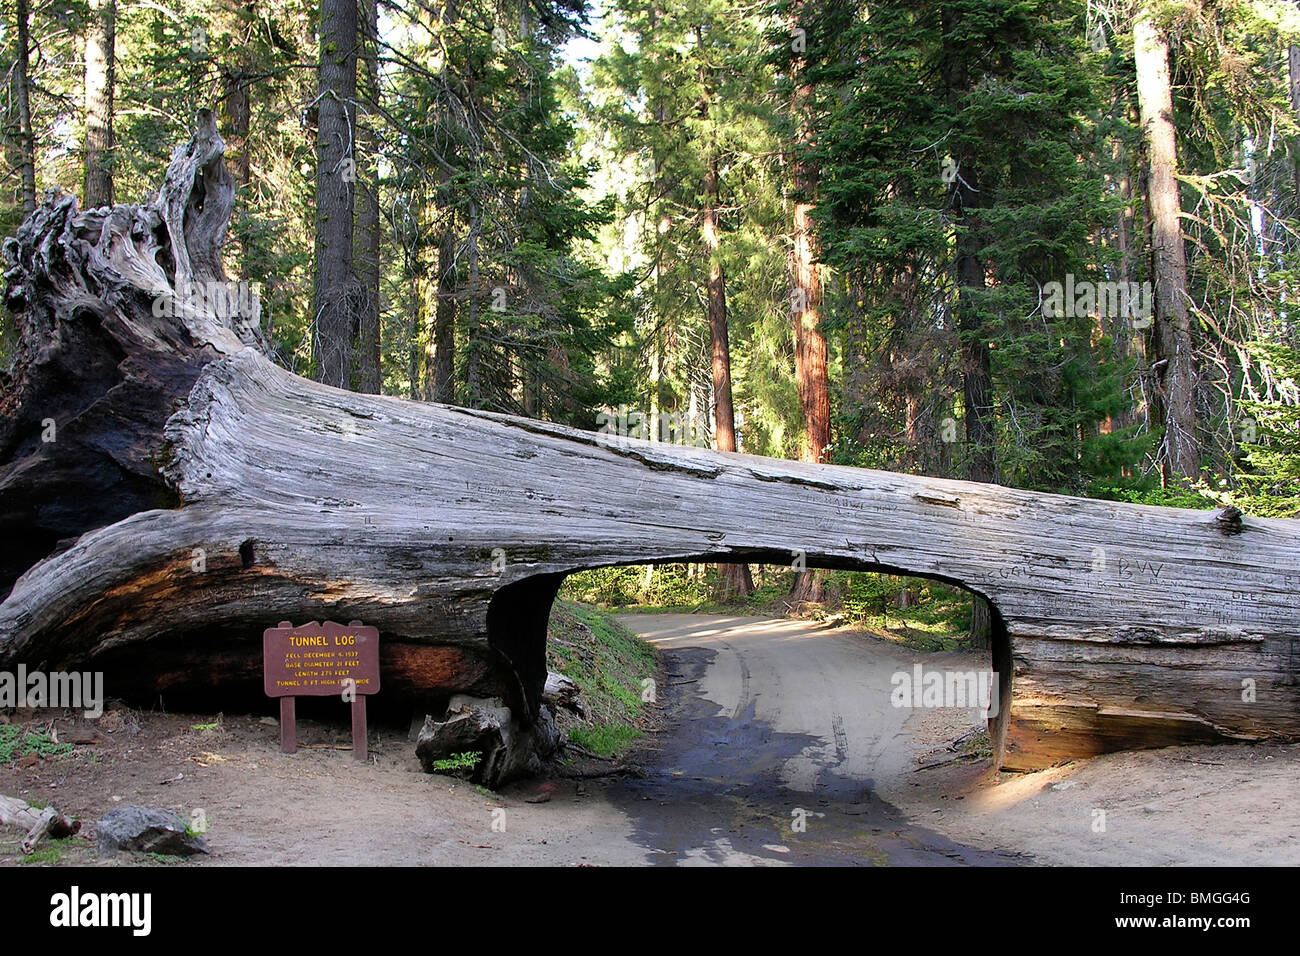 tunnel log, Sequoia national park, california, United States of America Stock Photo